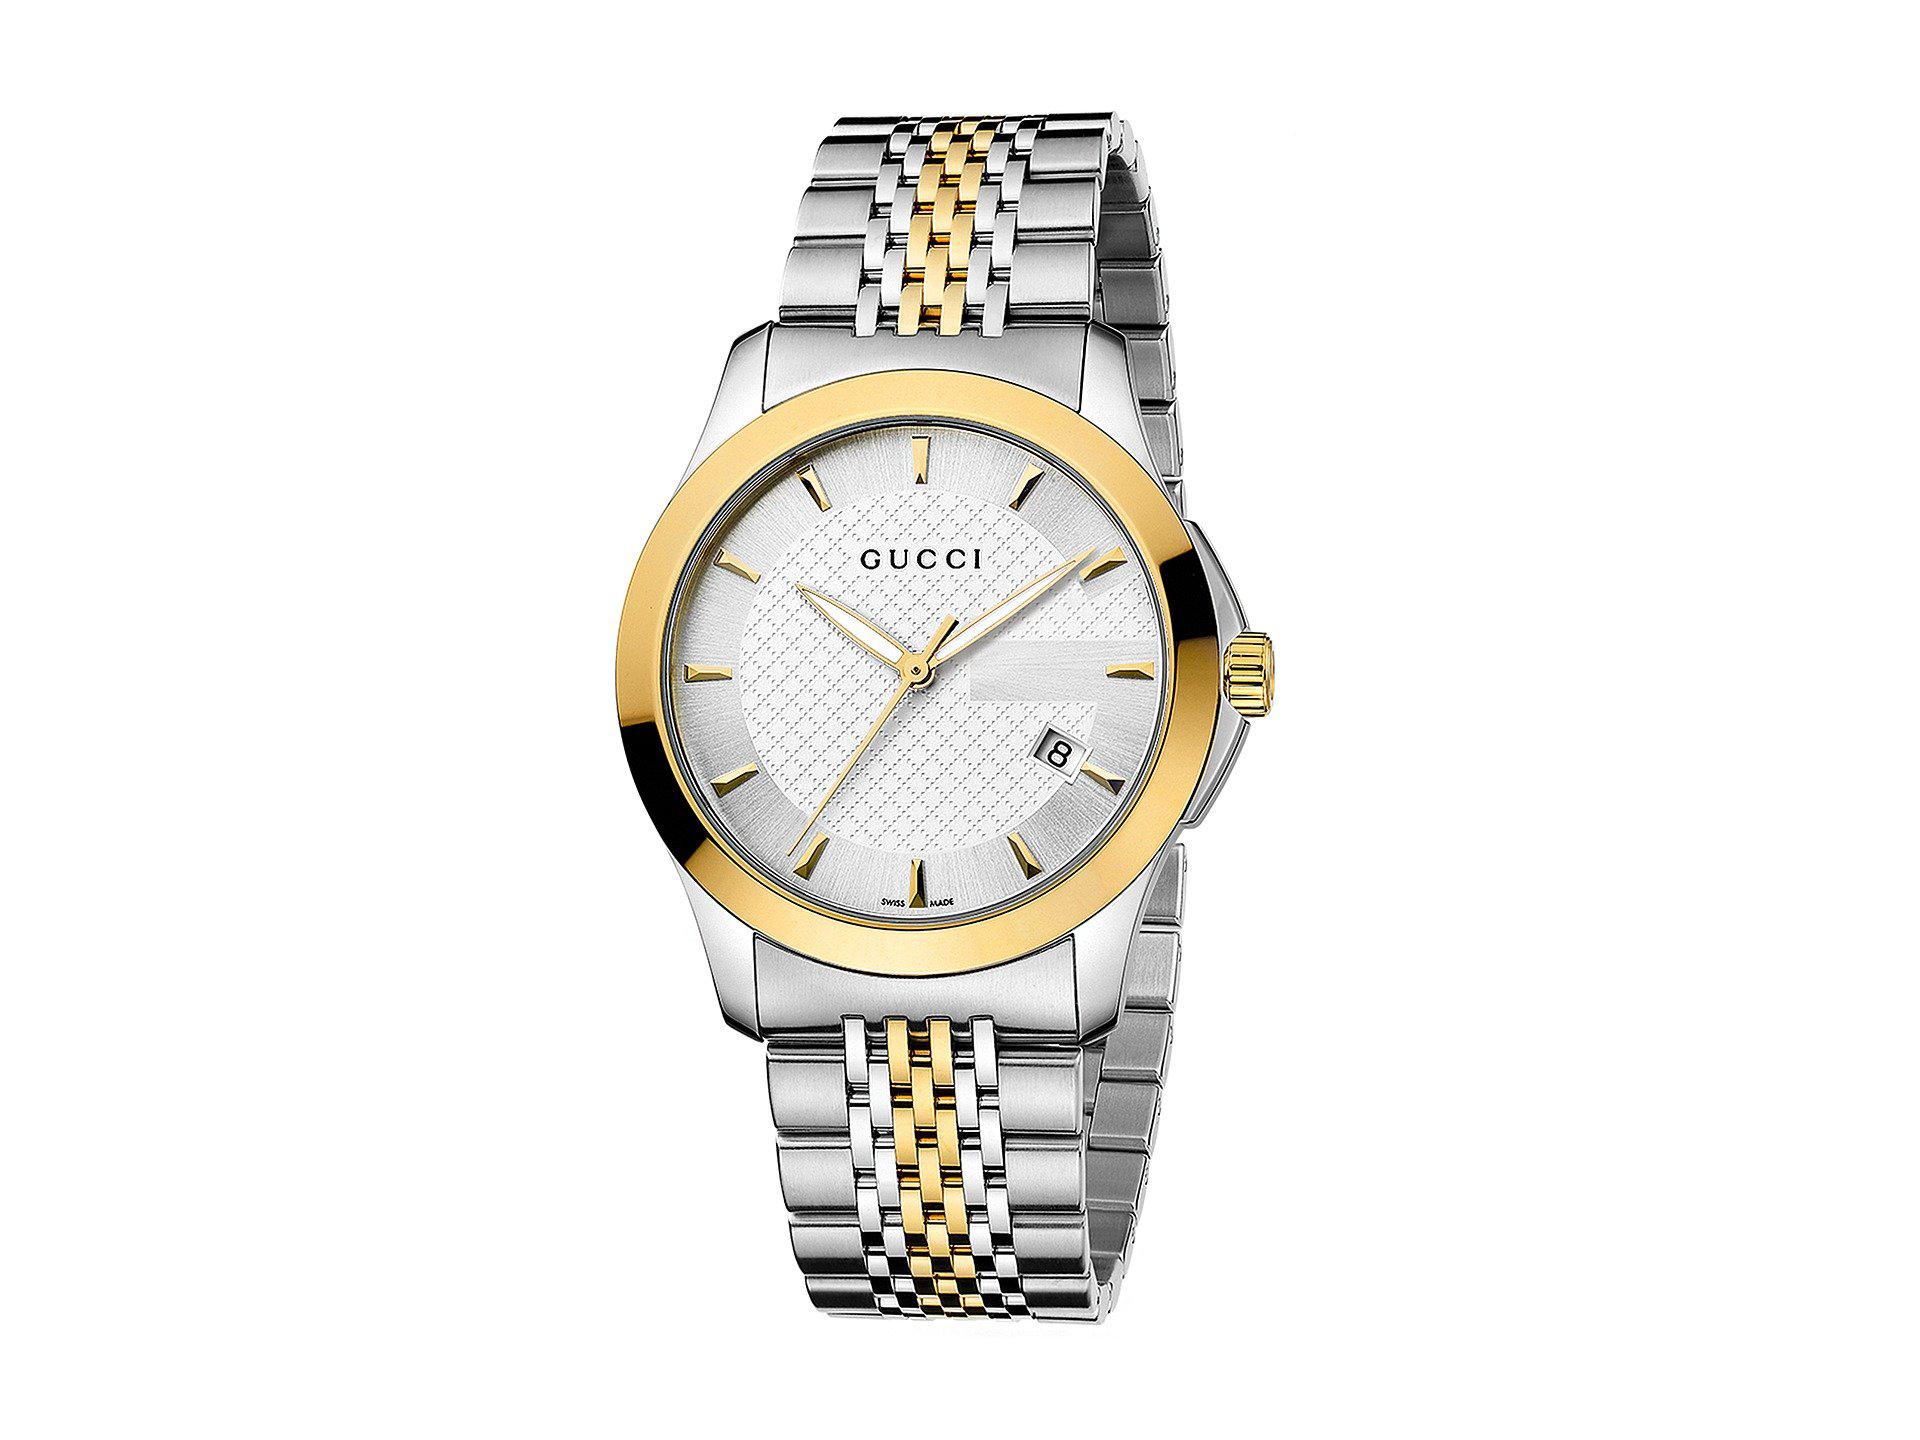 Gucci G-timeless 38mm Two-tone Stainless Steel Watch-ya126409 in 